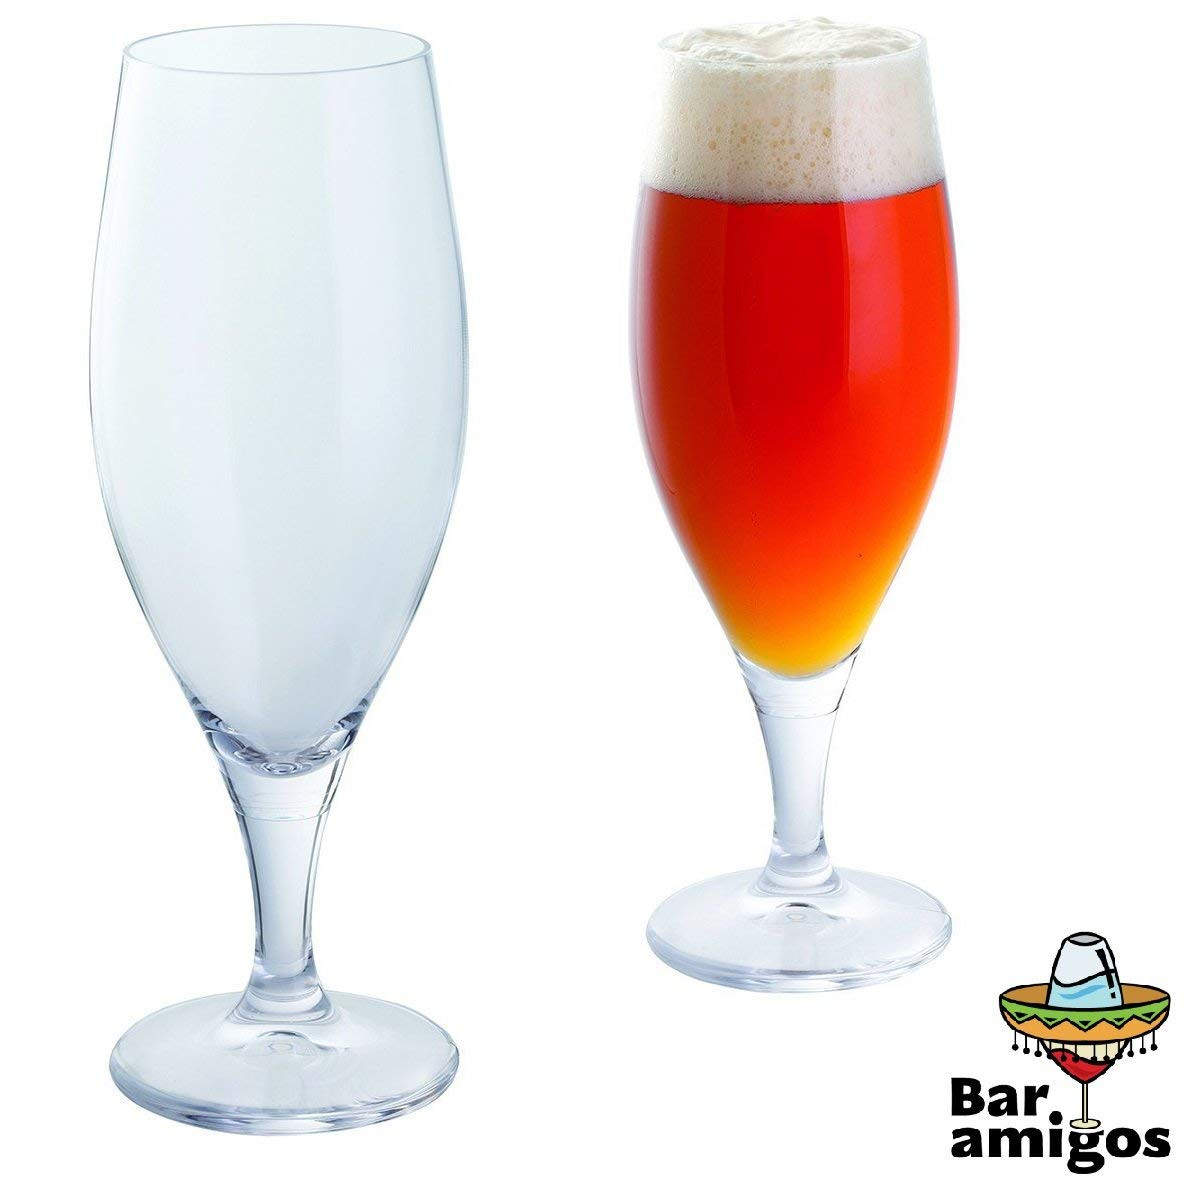 11 Elegant Large Acrylic Martini Vases 2024 free download large acrylic martini vases of two craft stemmed vintage beer glasses dartington crystal lager throughout produced for bar amigos by the famous dartington crystal who has over 50 years exper